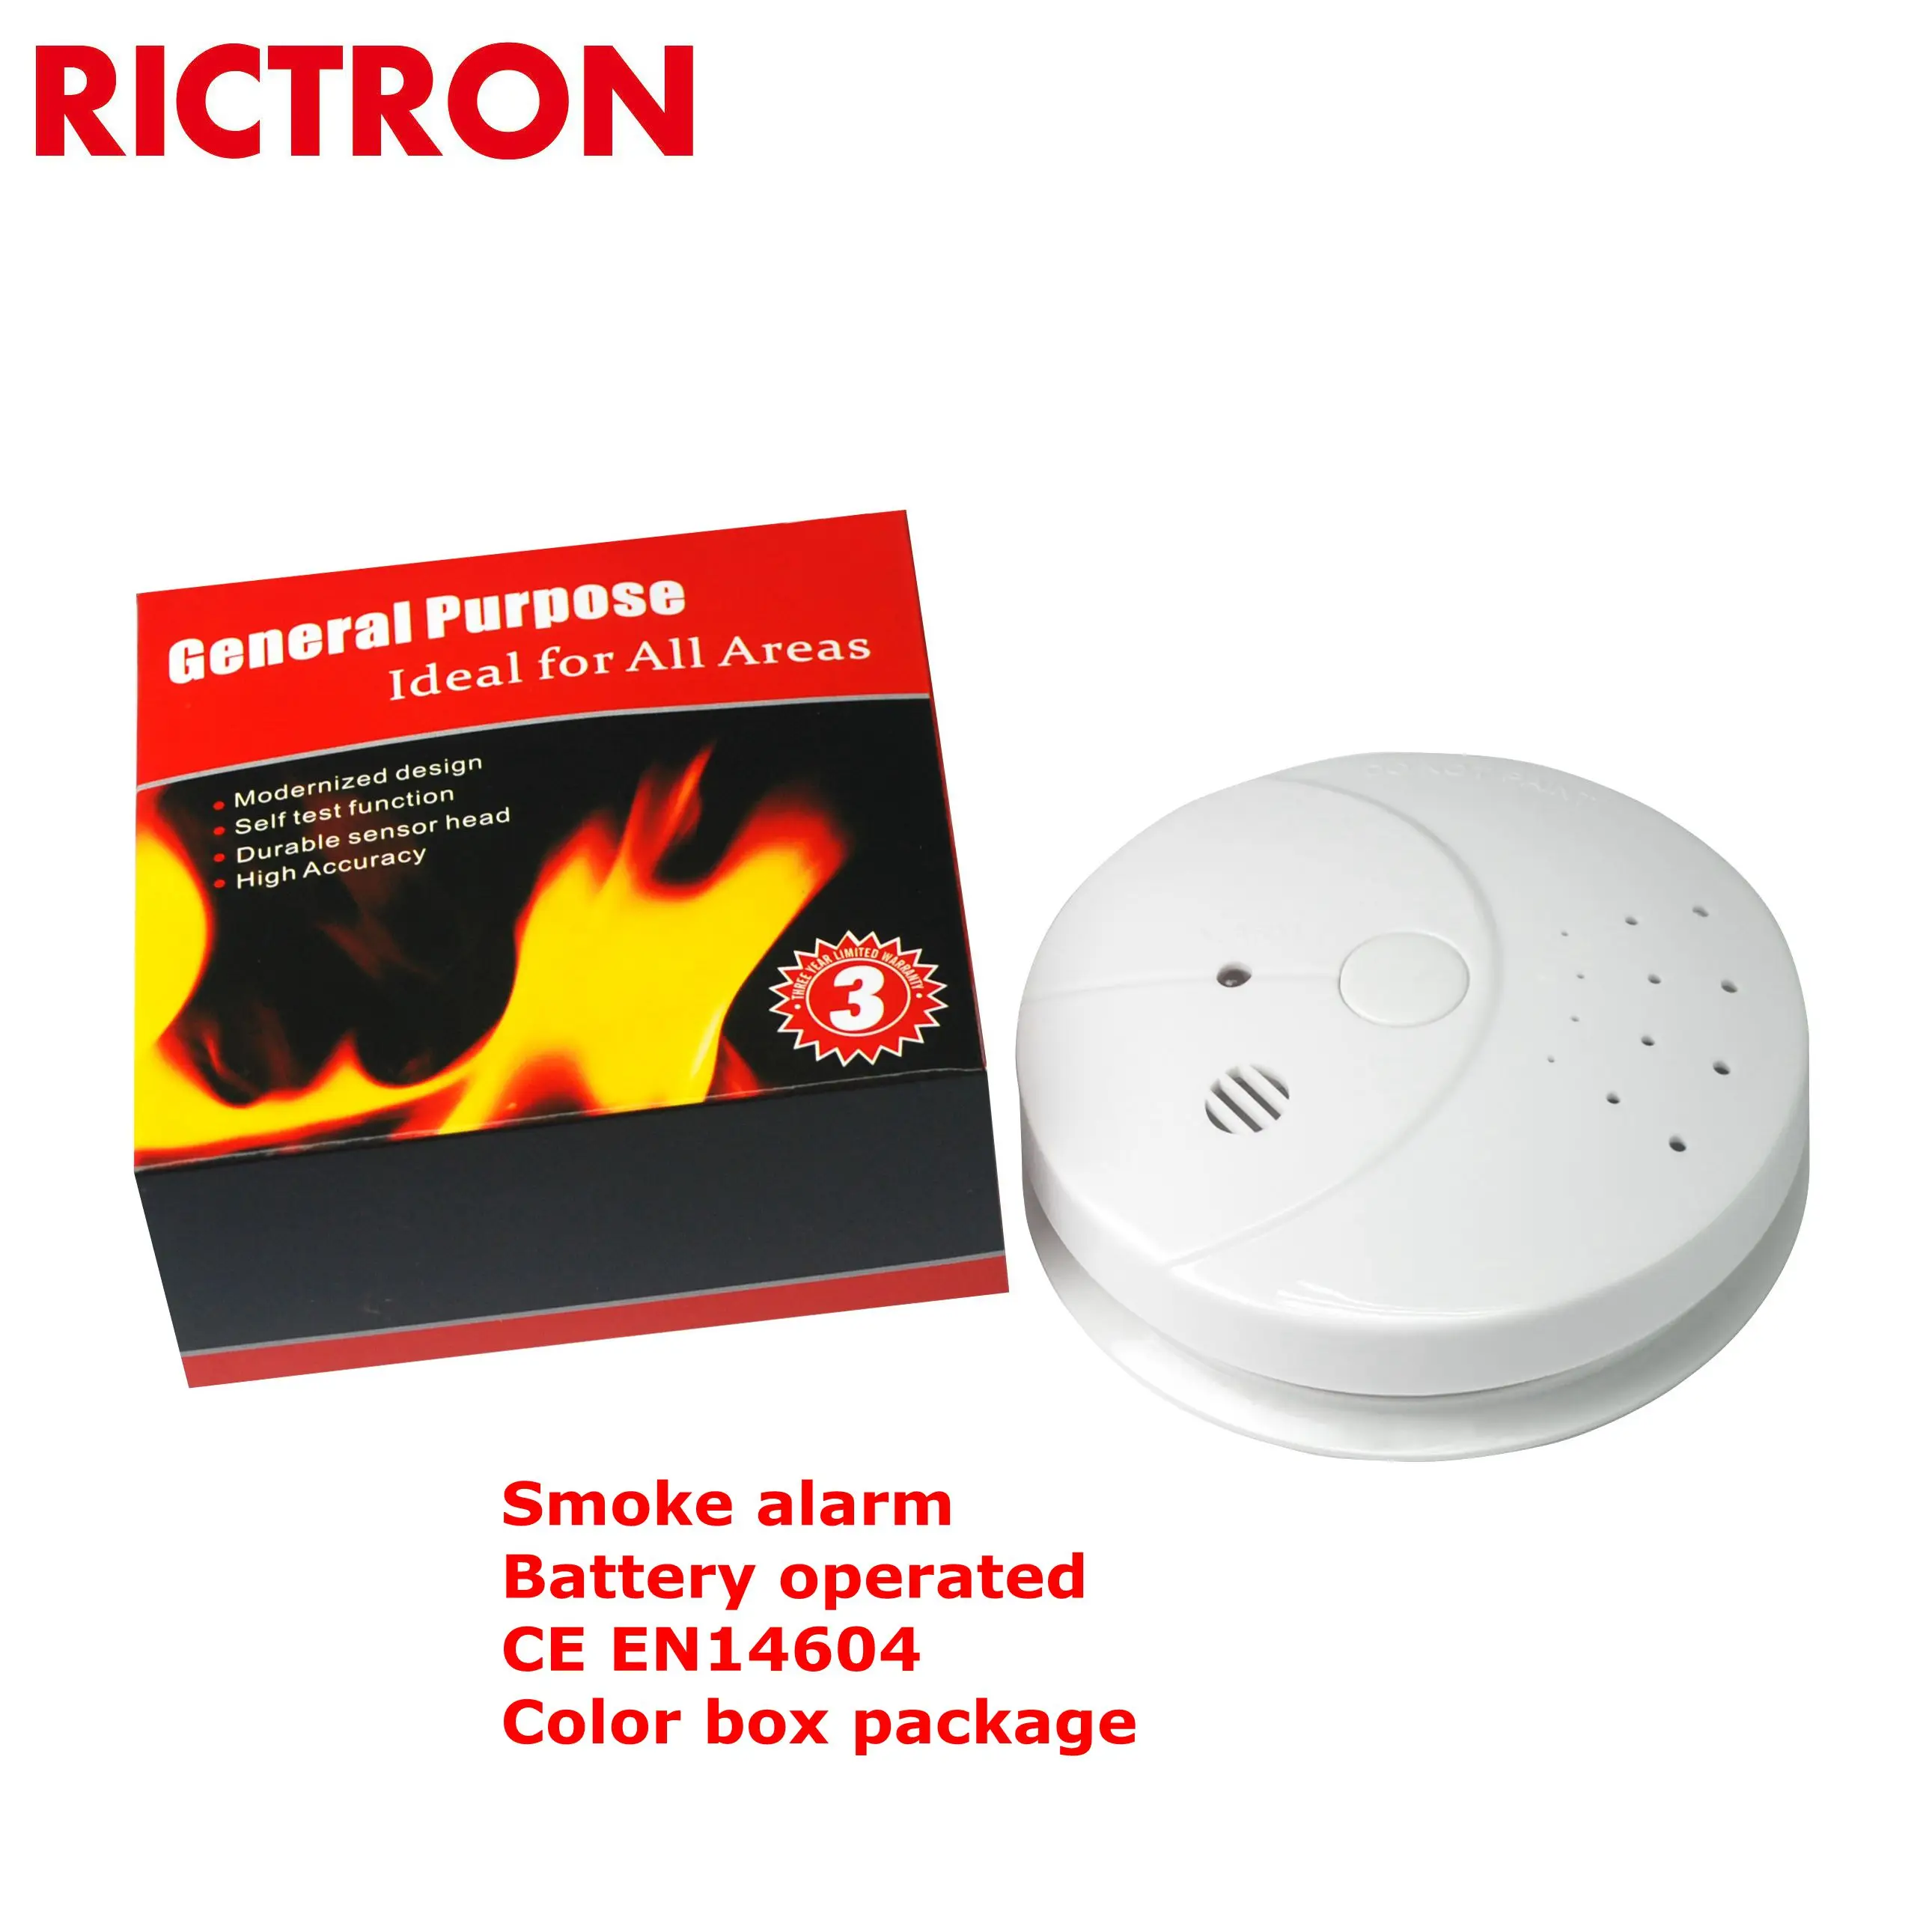 Rictron Fast Delivery High Sensitive 9v Battery Operate Stand Alone Smoke Detector Wall Mounted Buy 9v Battery Operated Wall Mounted Easy Installing 85 Db Smoke Dector High Security High Sensitive Product On Alibaba Com